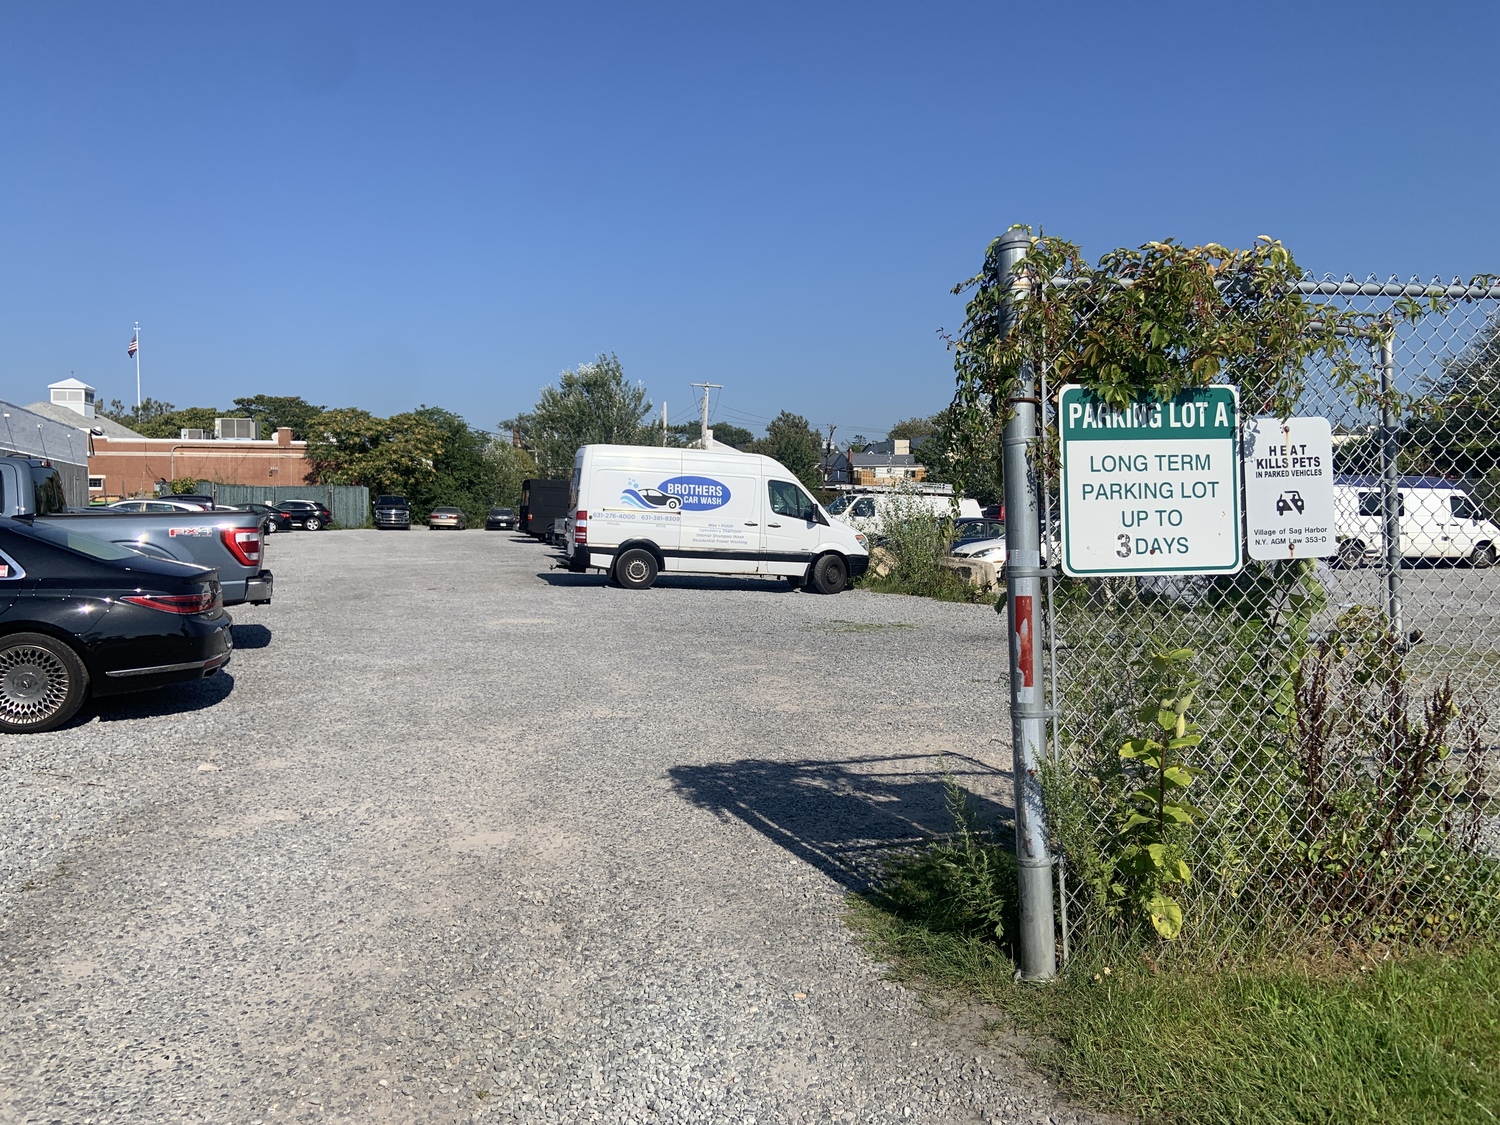 The gas ball parking lot in Sag Harbor, long used for overflow parking, will be transferred to developer Adam Potter on September 16, who has said he would close the lot if a lease deal could not be reached with Sag Harbor Village. STEPHEN J. KOTZ